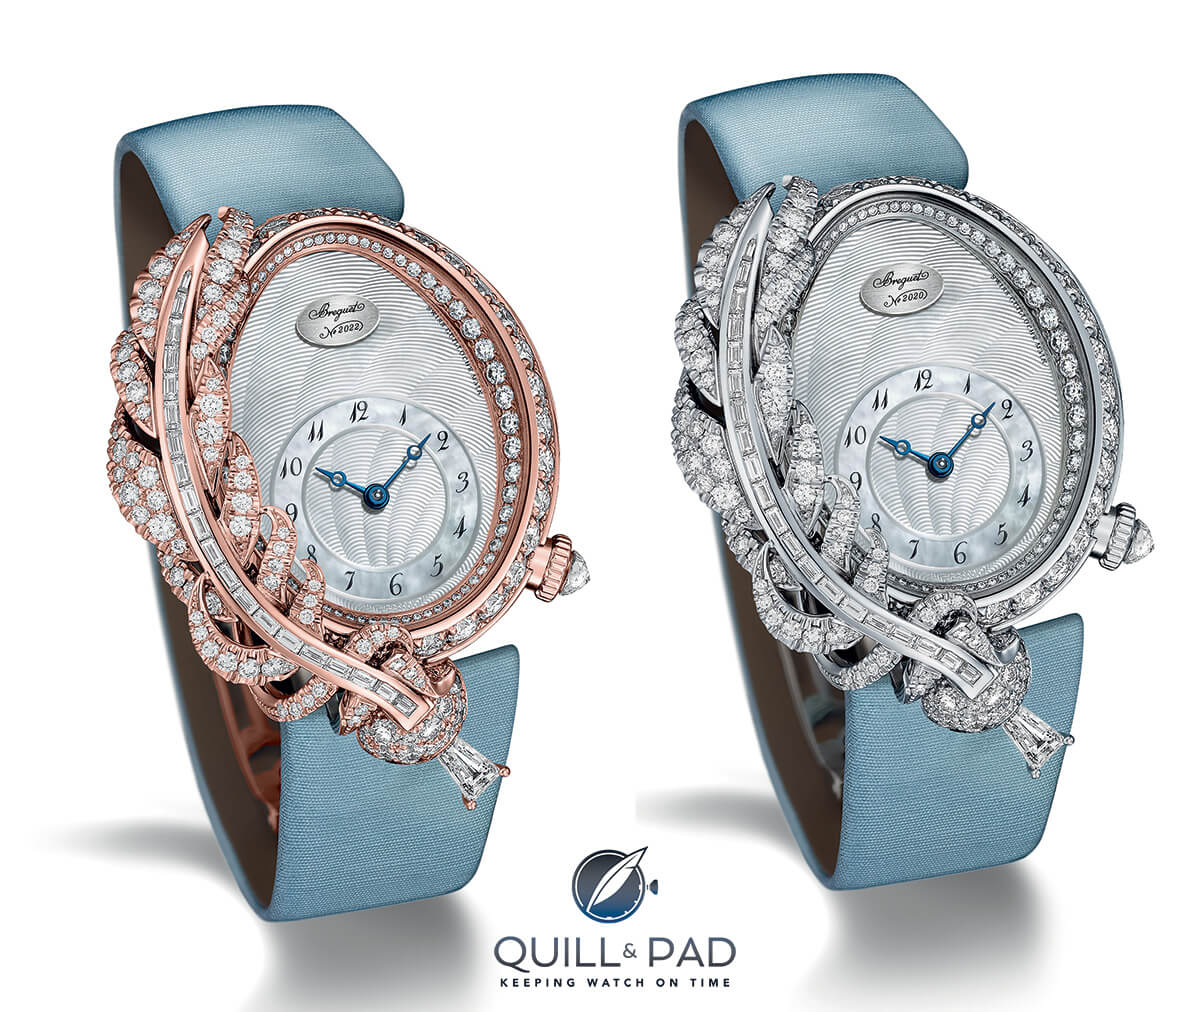 Breguet Rêve de Plume in pink gold (left) and white gold